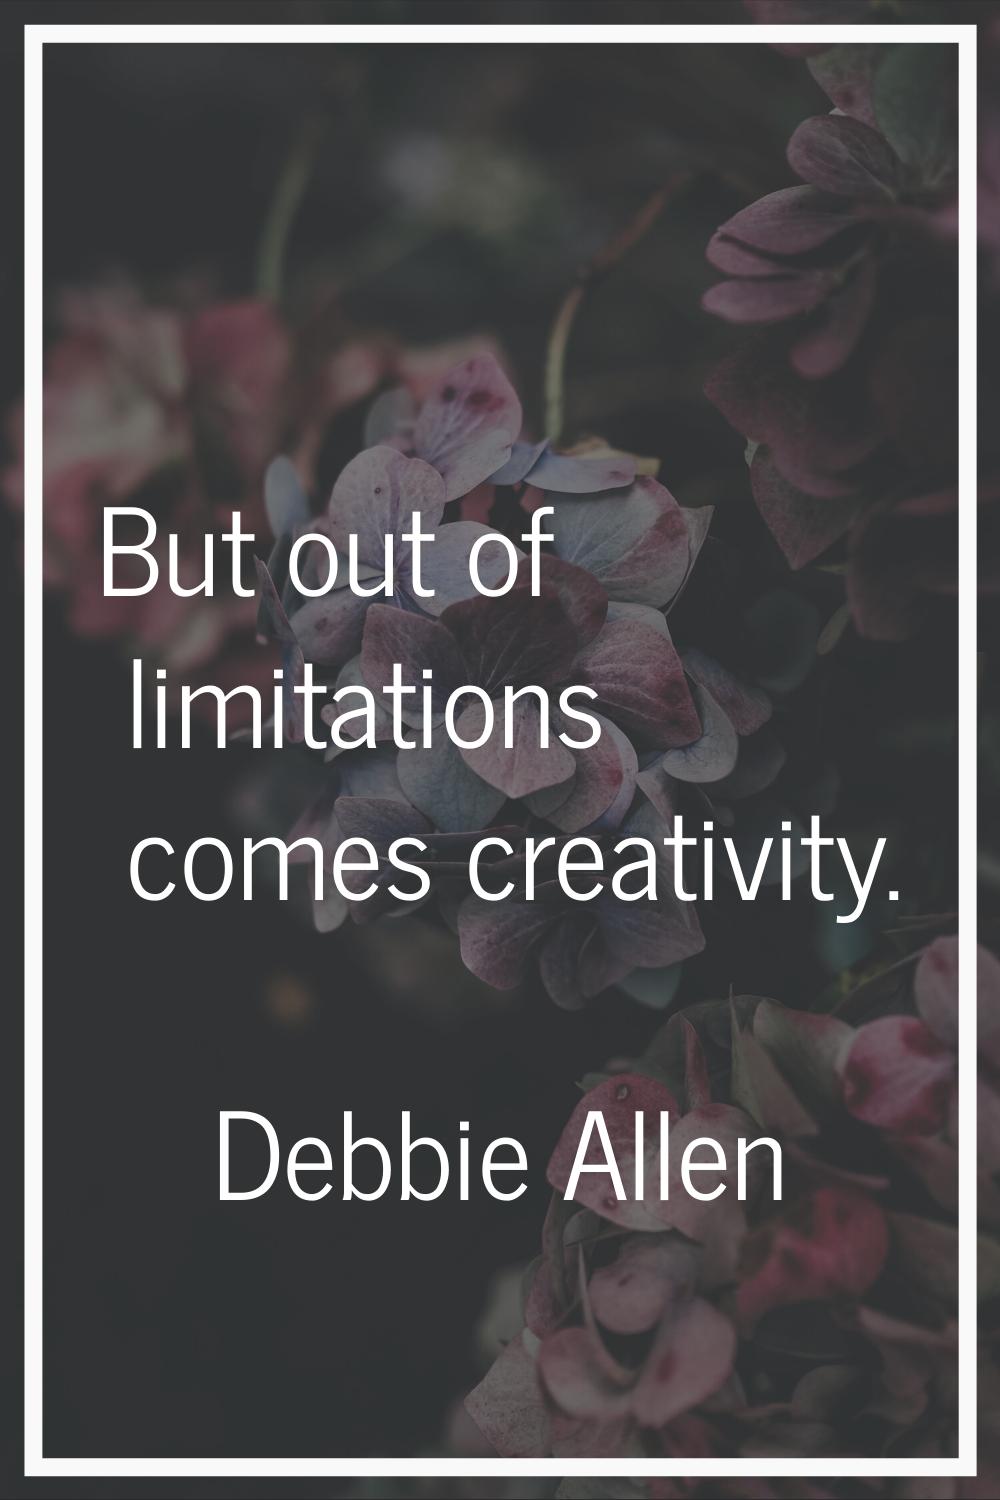 But out of limitations comes creativity.